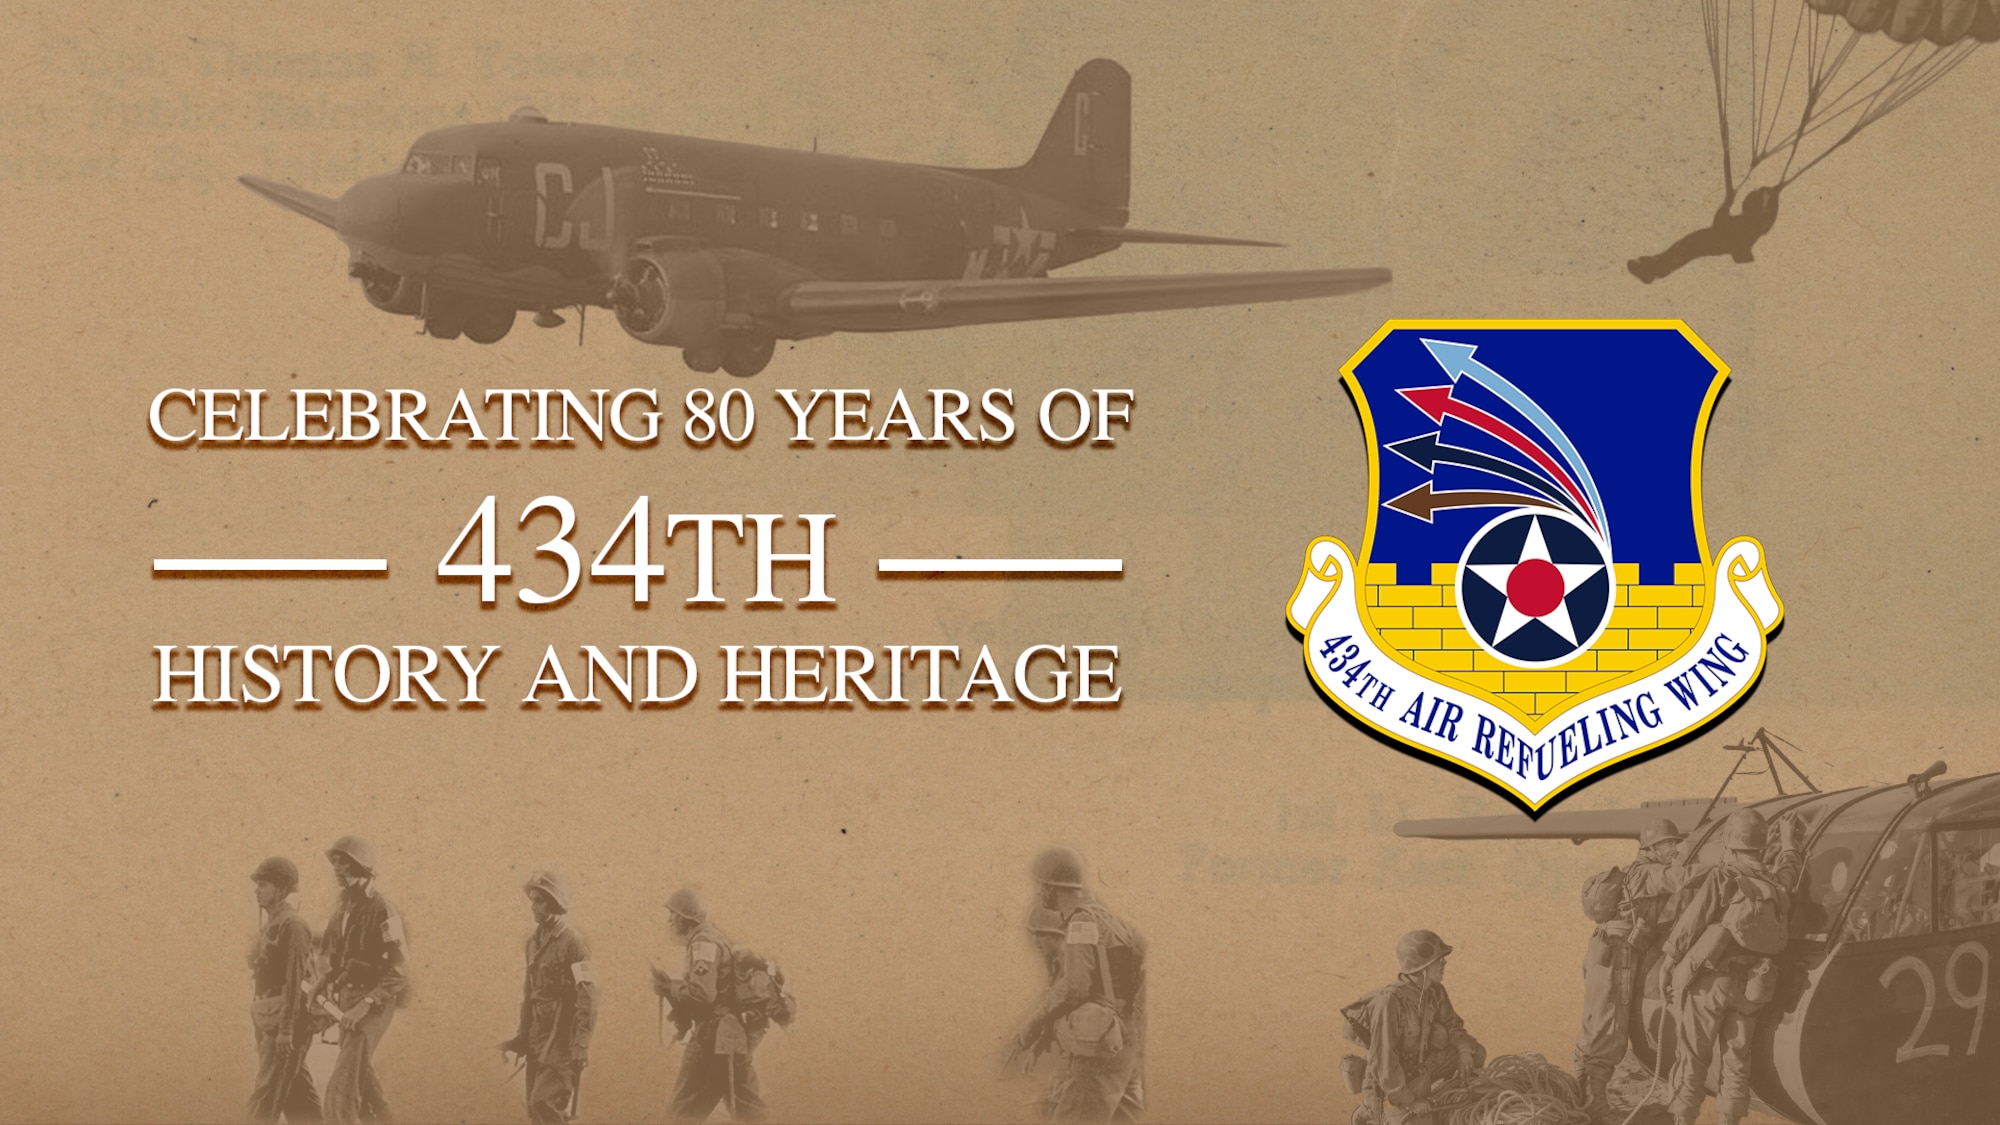 A tan graphic with WWII imagery superimposed. In white text at left, "CELEBRATING 80 YEARS OF 434TH HISTORY AND HERITAGE". At right, the current seal of the 434th Air Refueling Wing.